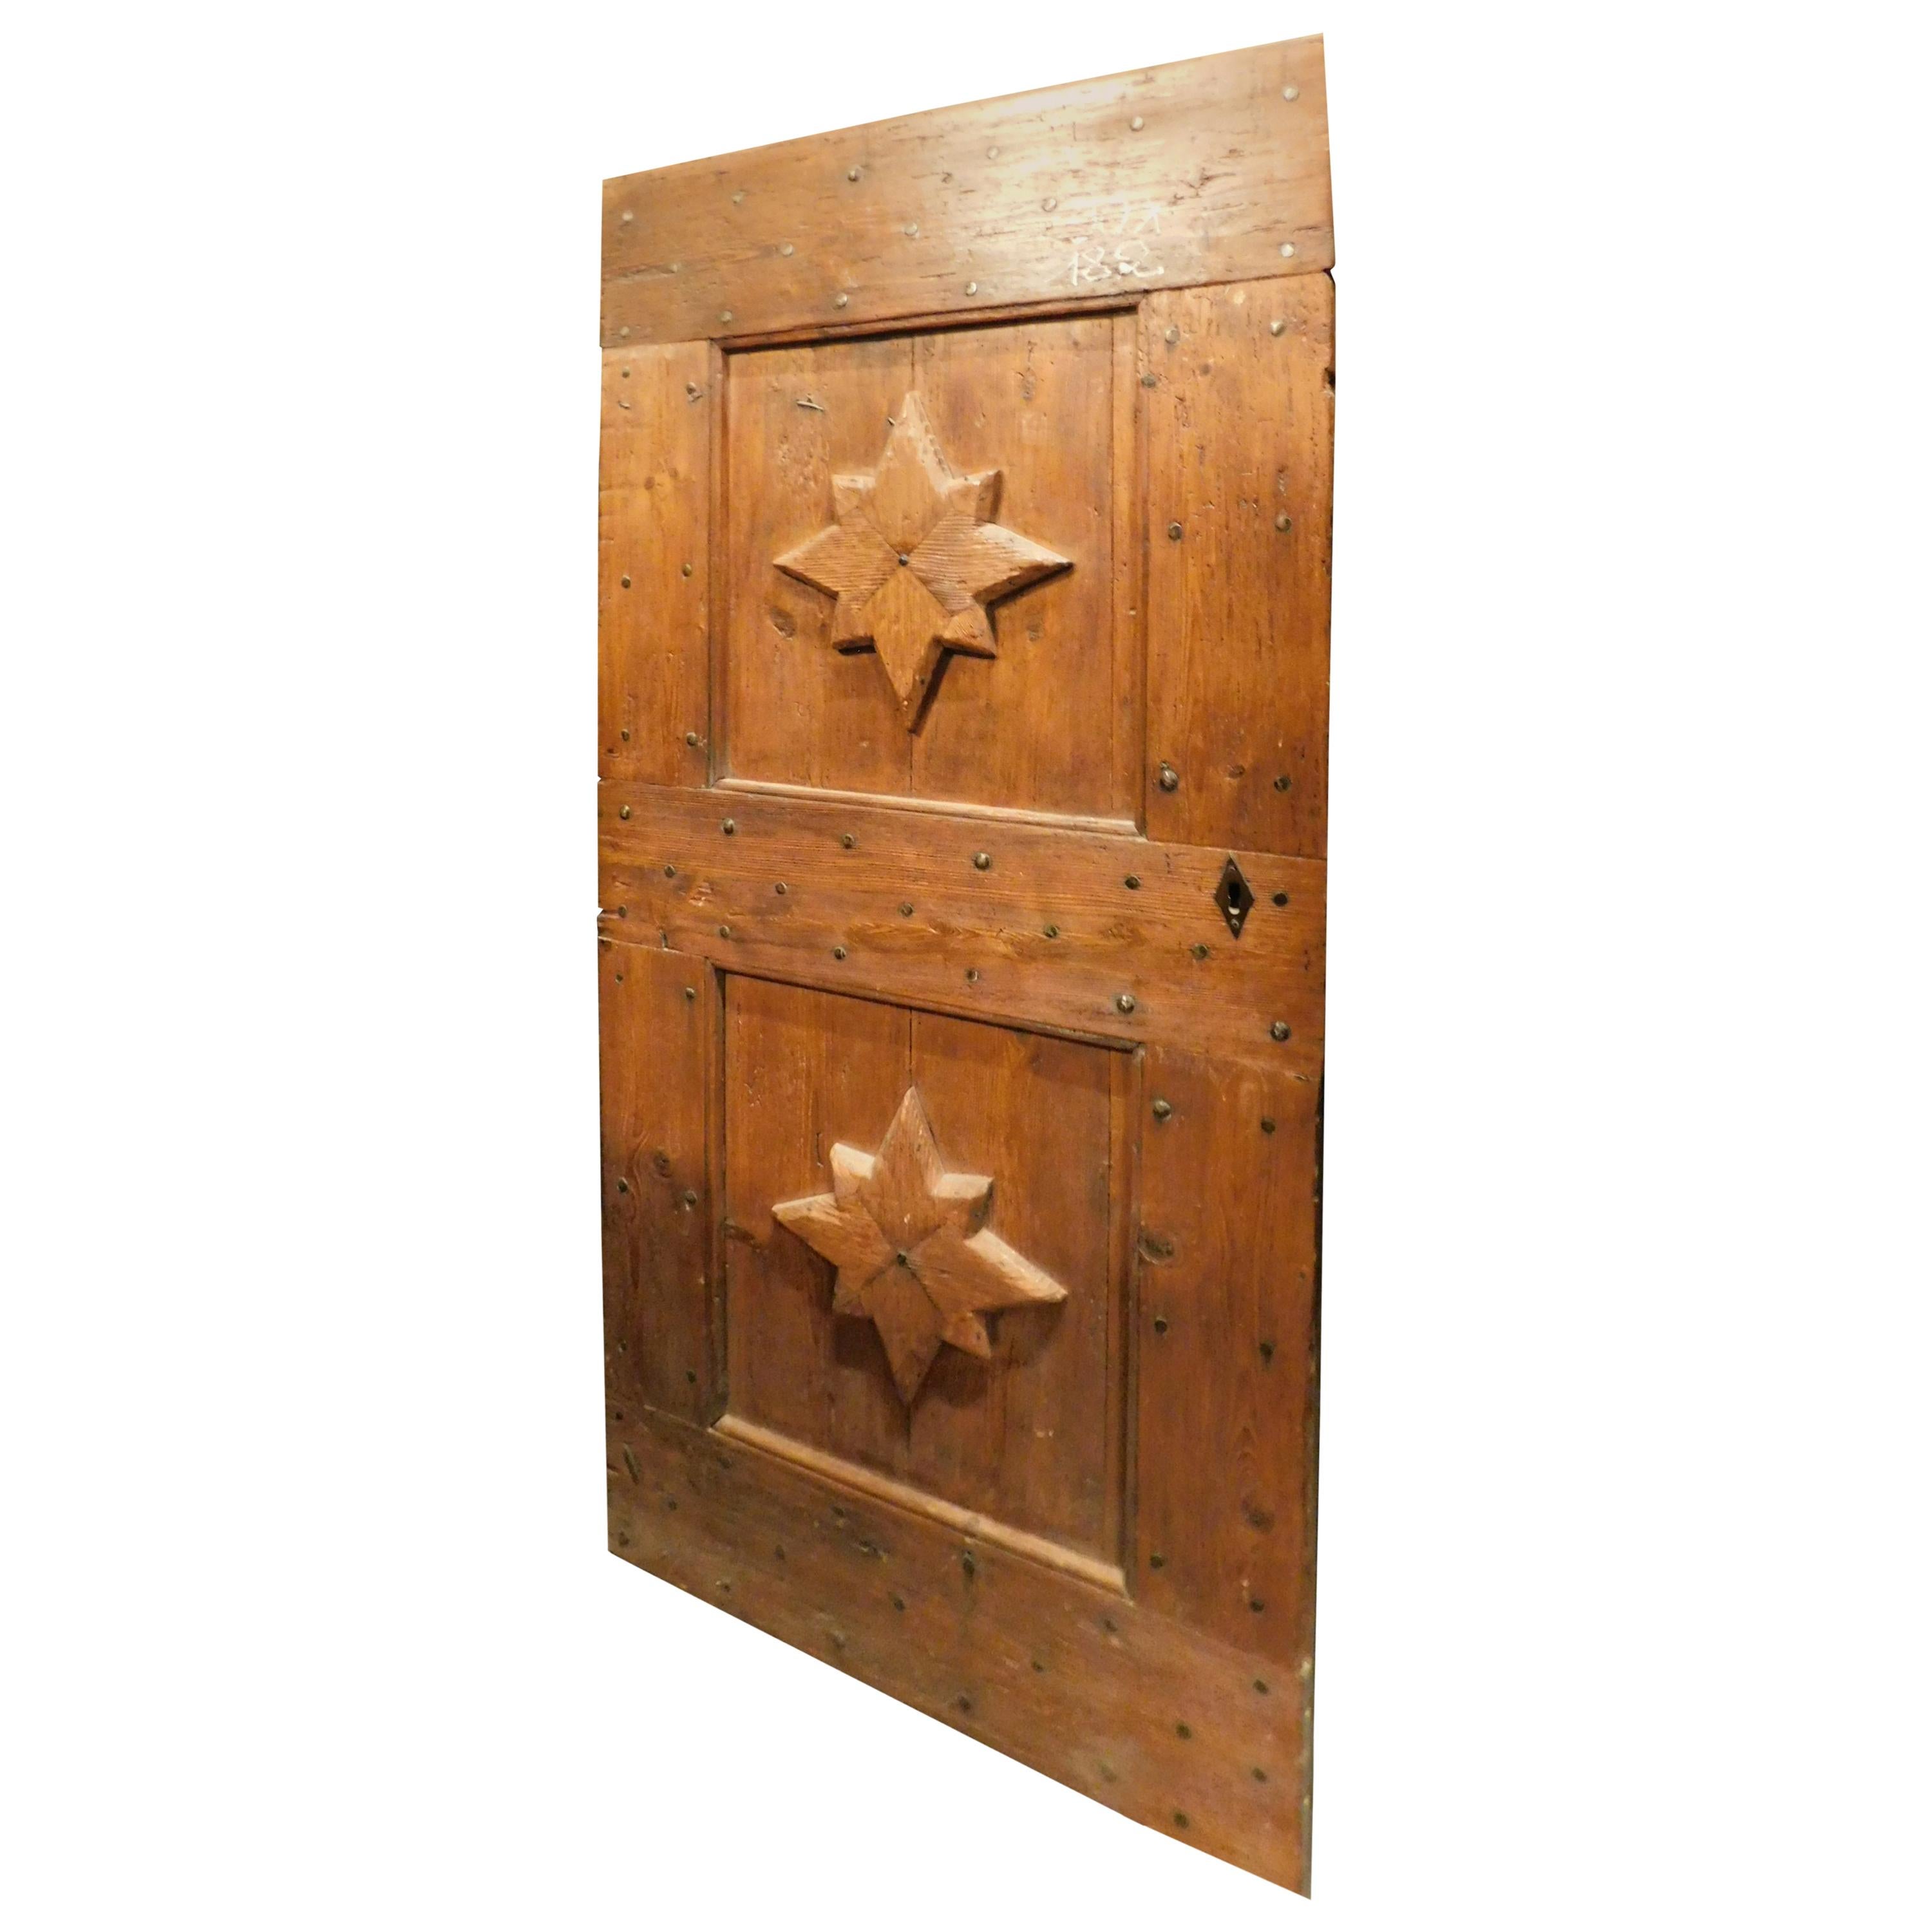 Antique Door in Red Larch Wood, Carved Star, Rustic from Mountain, Italy, 1800